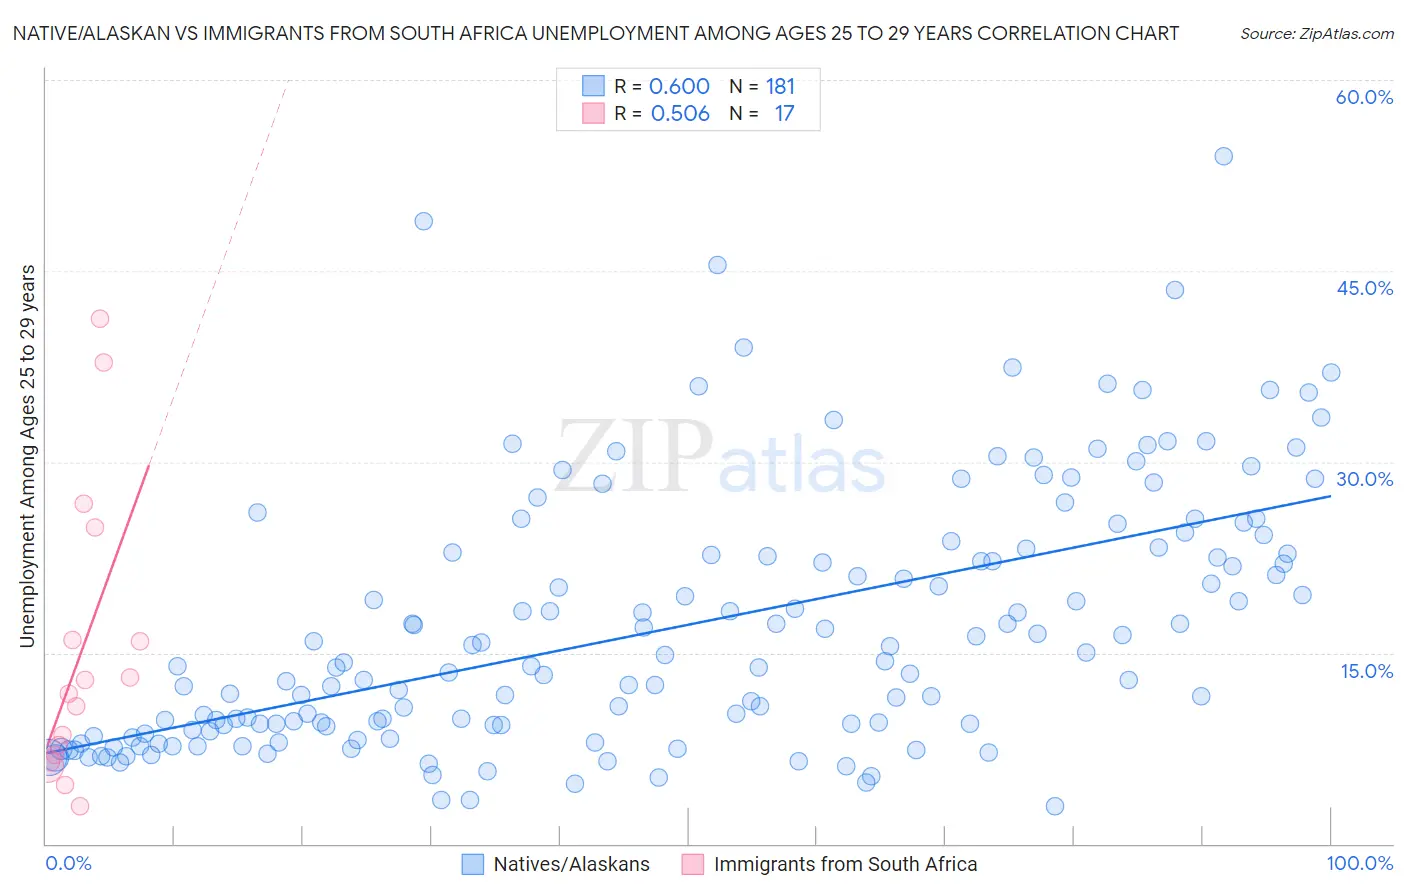 Native/Alaskan vs Immigrants from South Africa Unemployment Among Ages 25 to 29 years